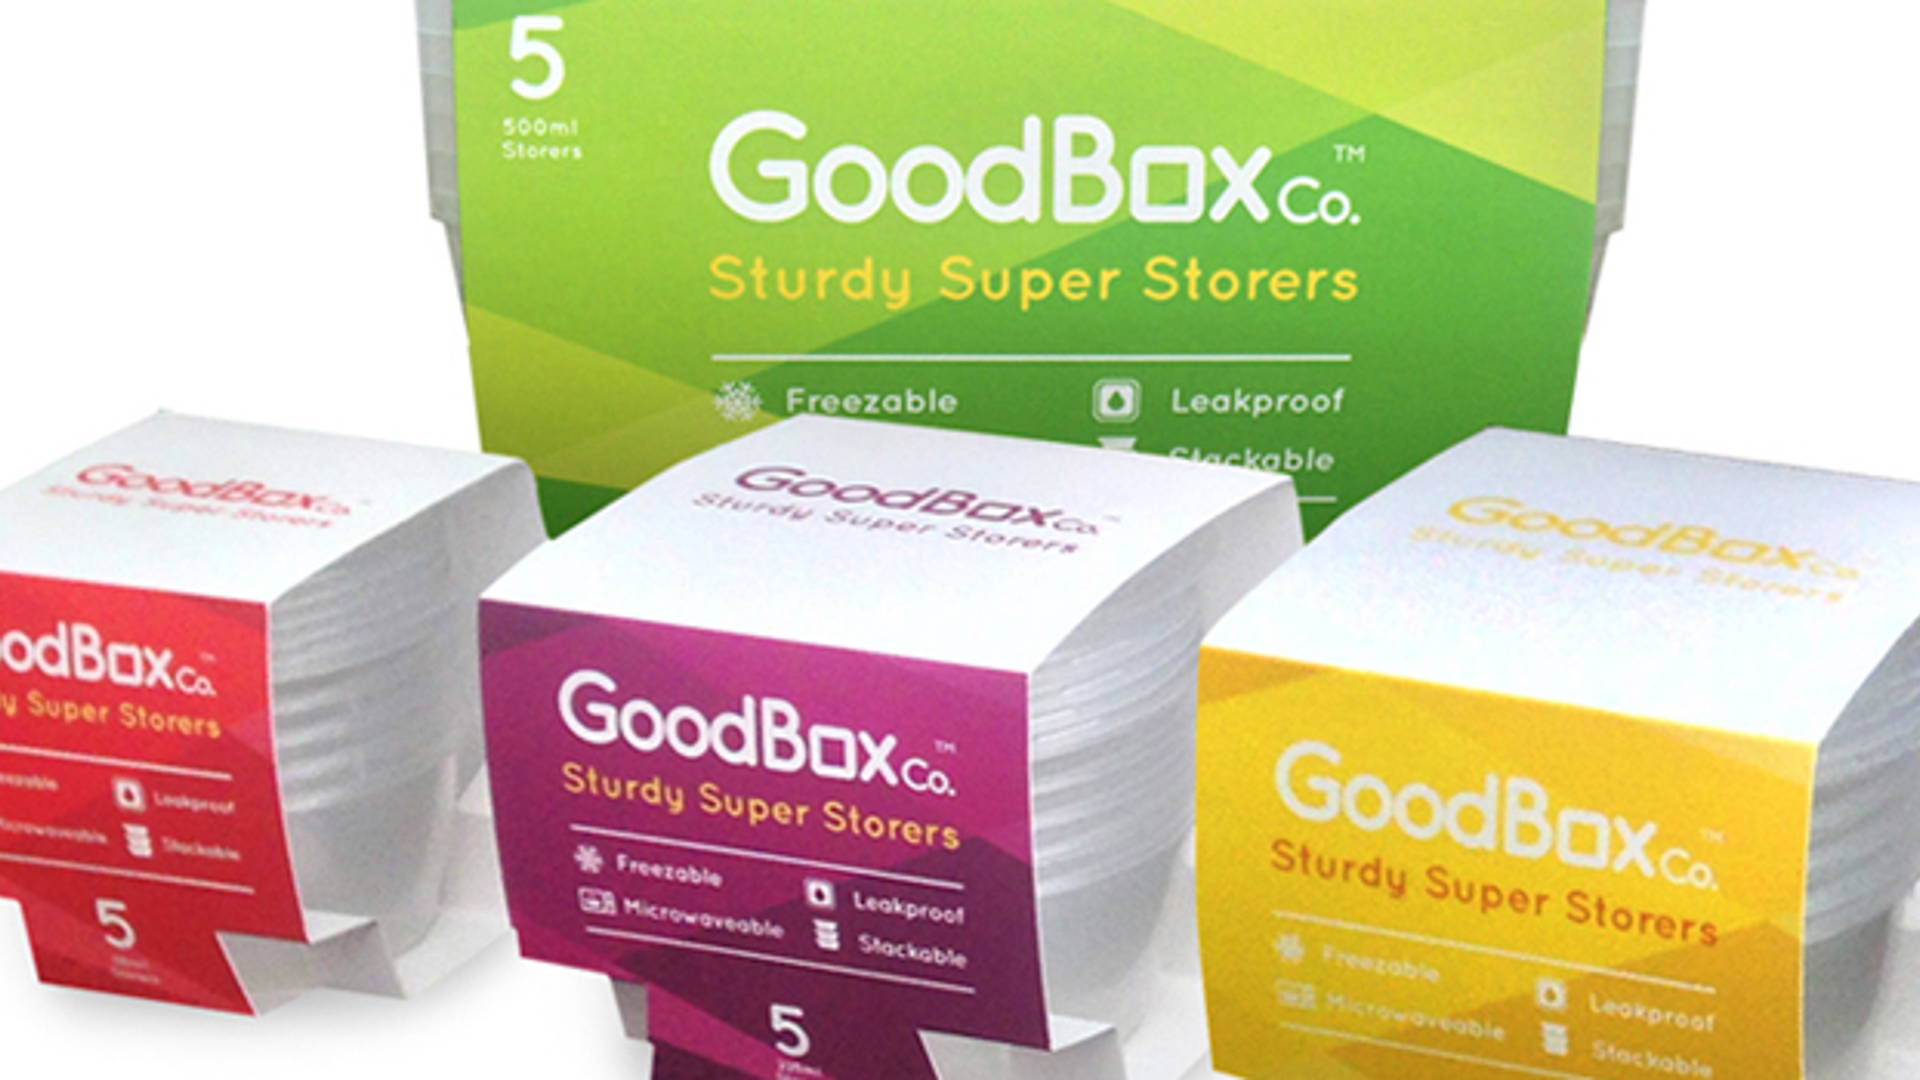 Featured image for GoodBox Co.